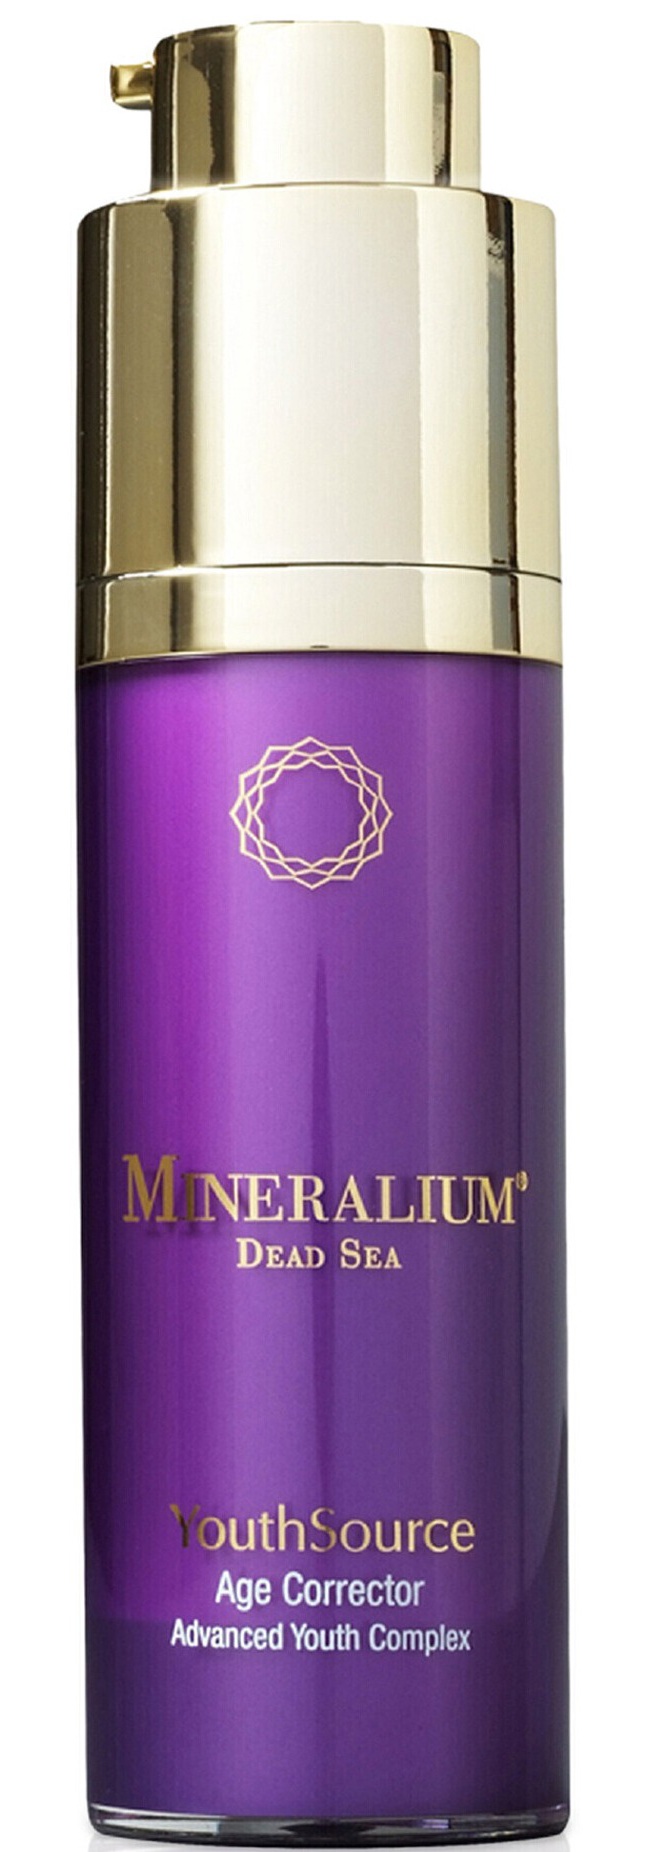 Mineralium Youth Source Age Corrector